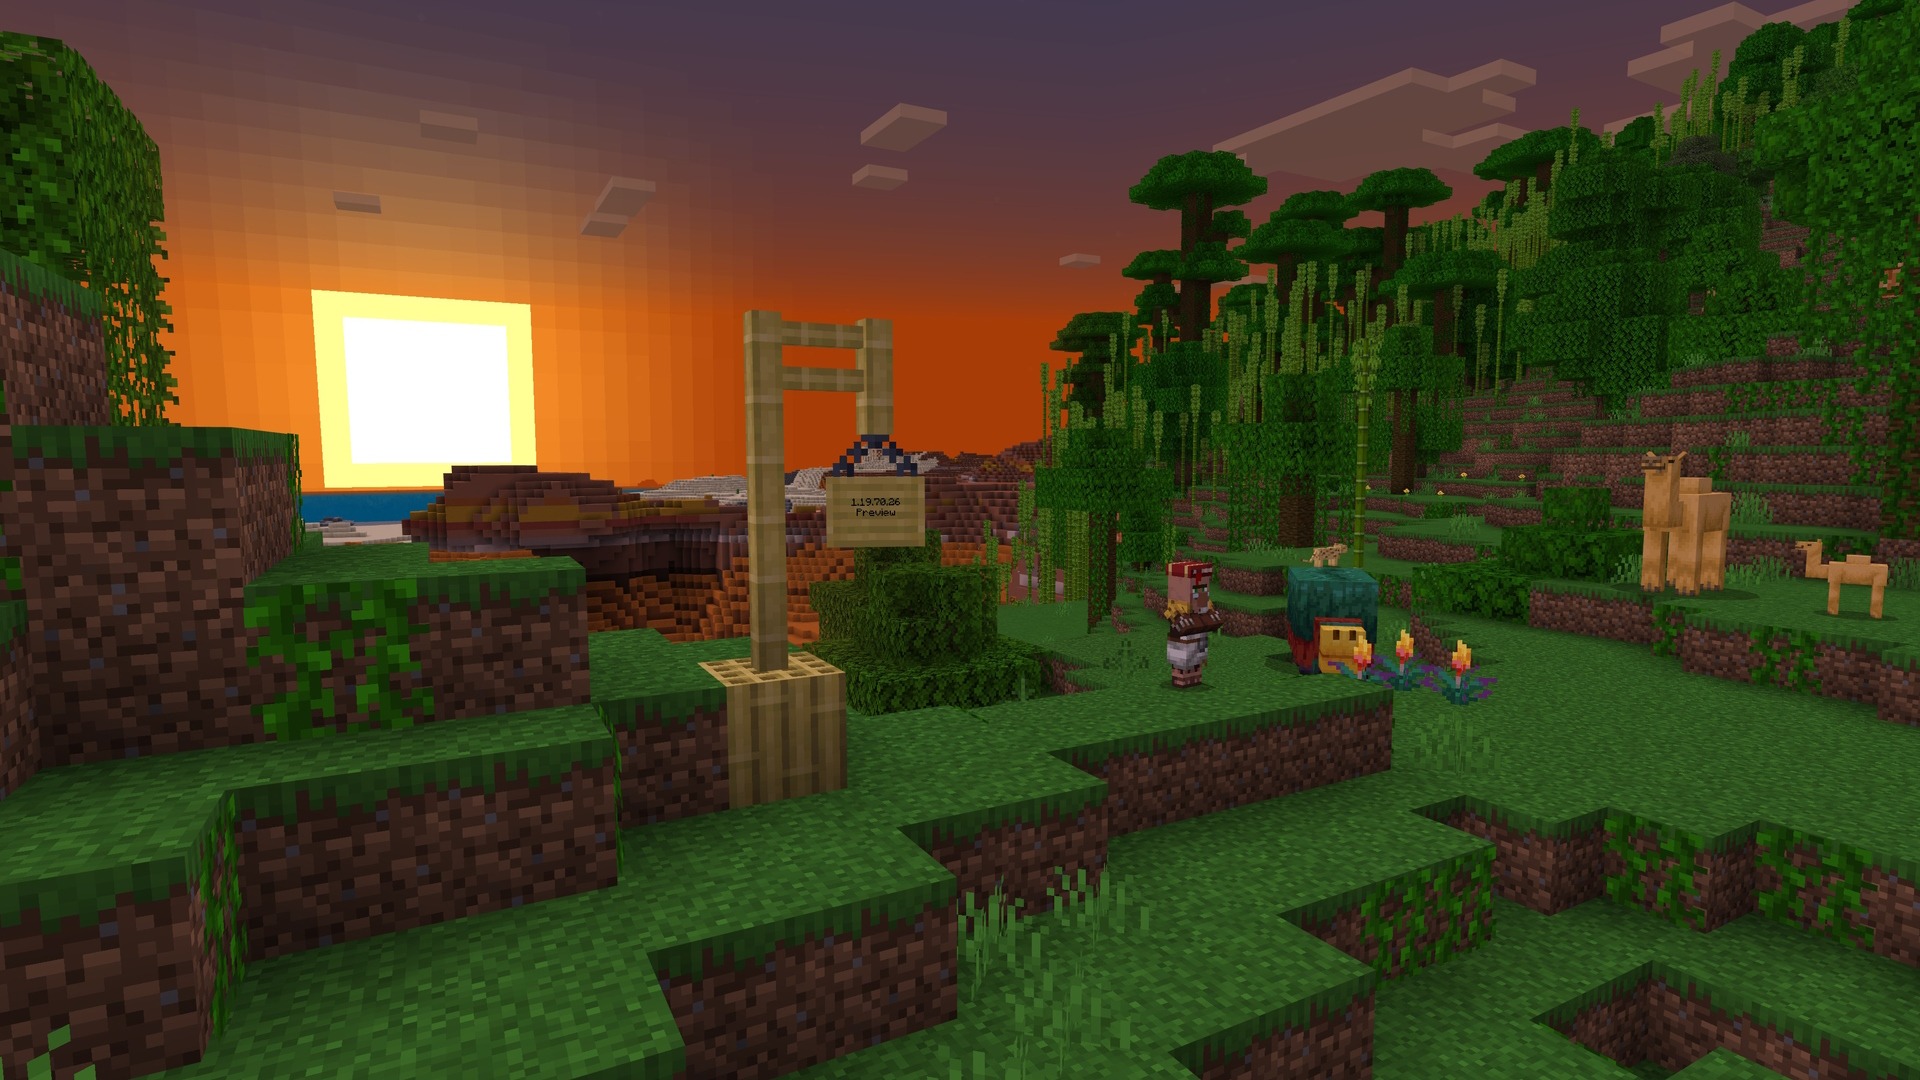 A Minecraft screenshot of the sun going down, with a sniffer, a villager, and camels in the scene.